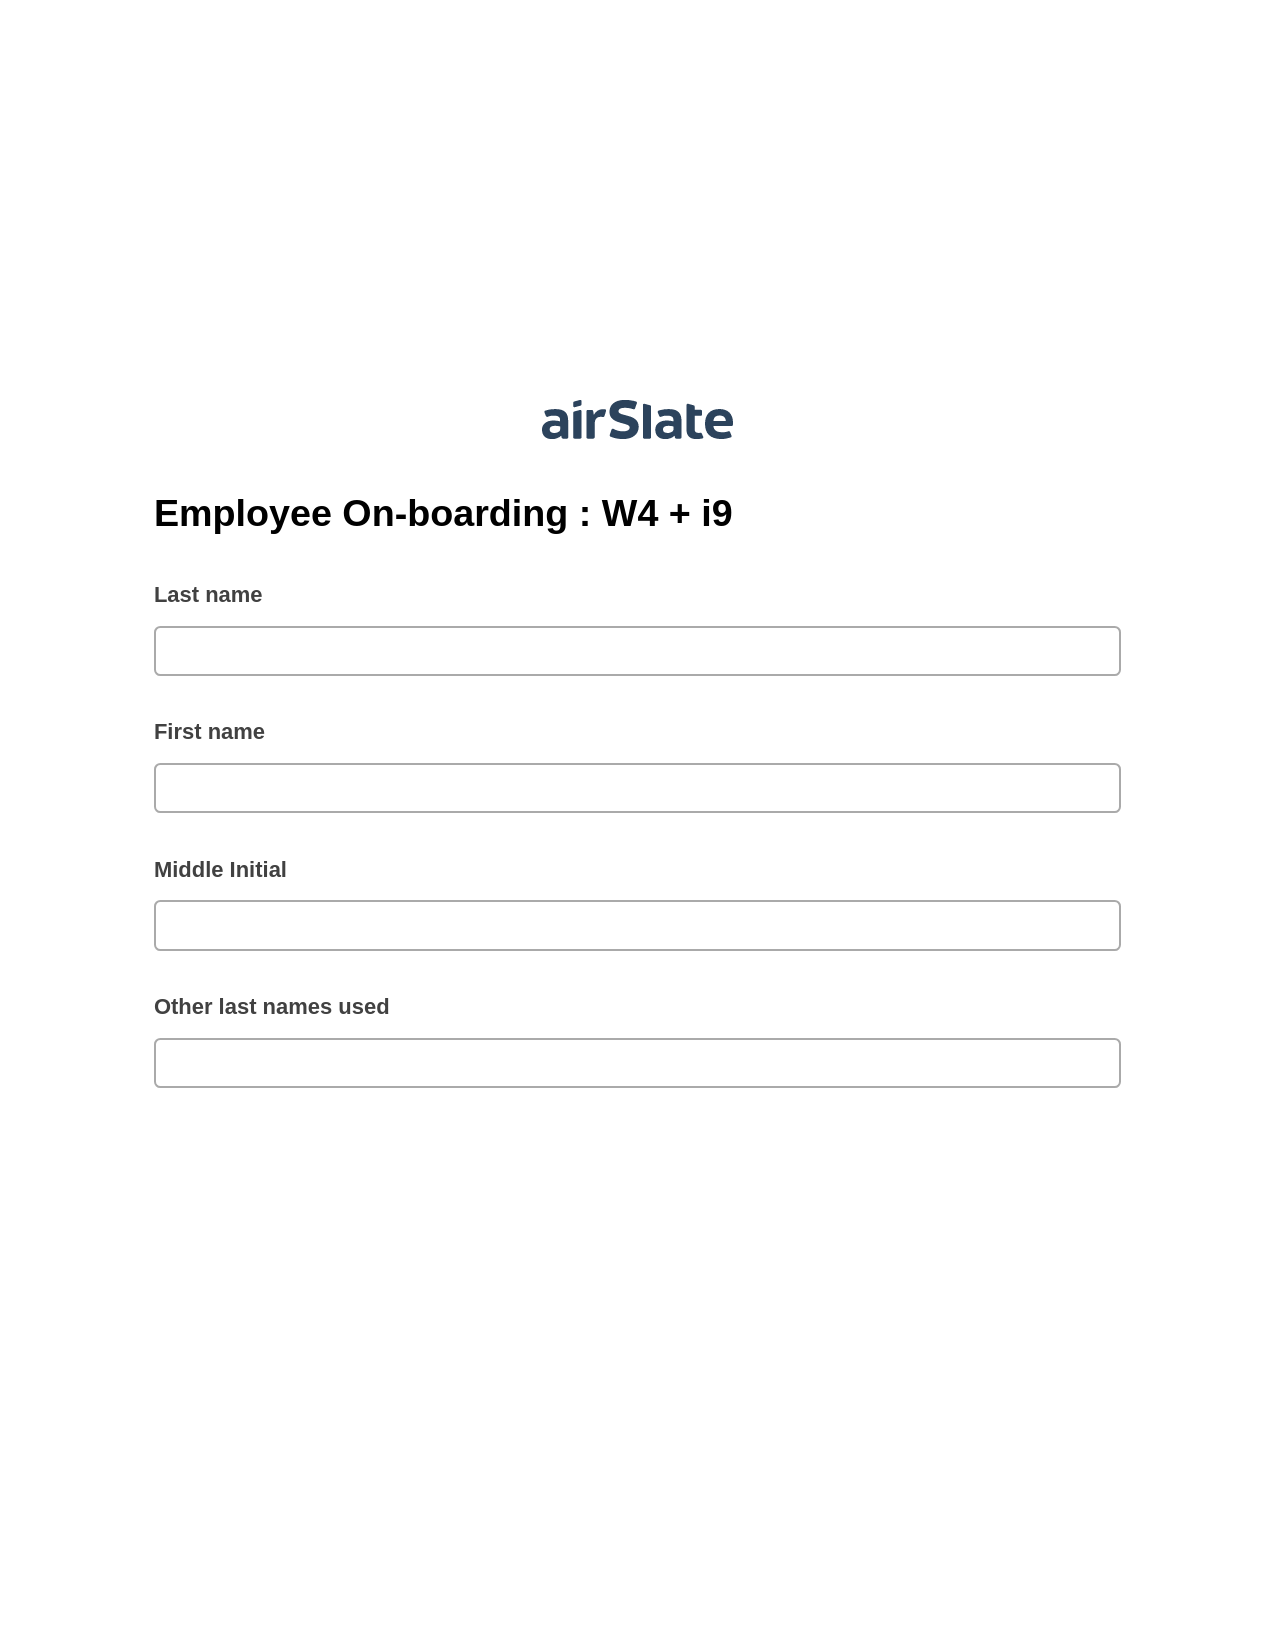 Employee On-boarding : W4 + i9 Pre-fill from Salesforce Records via SOQL Bot, Assign Slate Name Bot, Export to Google Sheet Bot